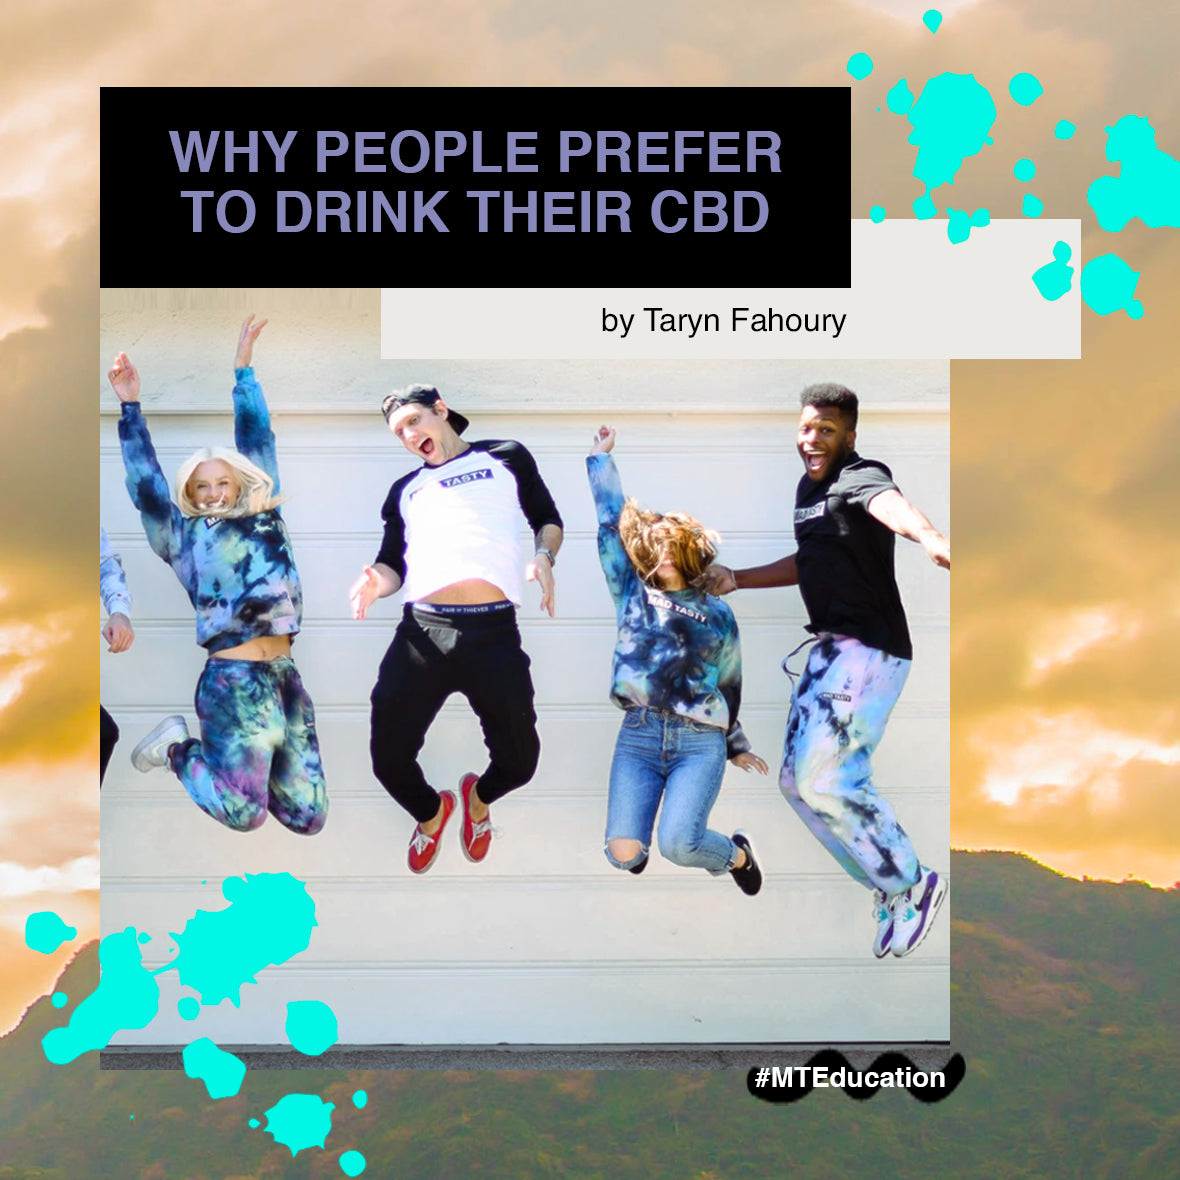 WHY PEOPLE PREFER TO DRINK THEIR CBD